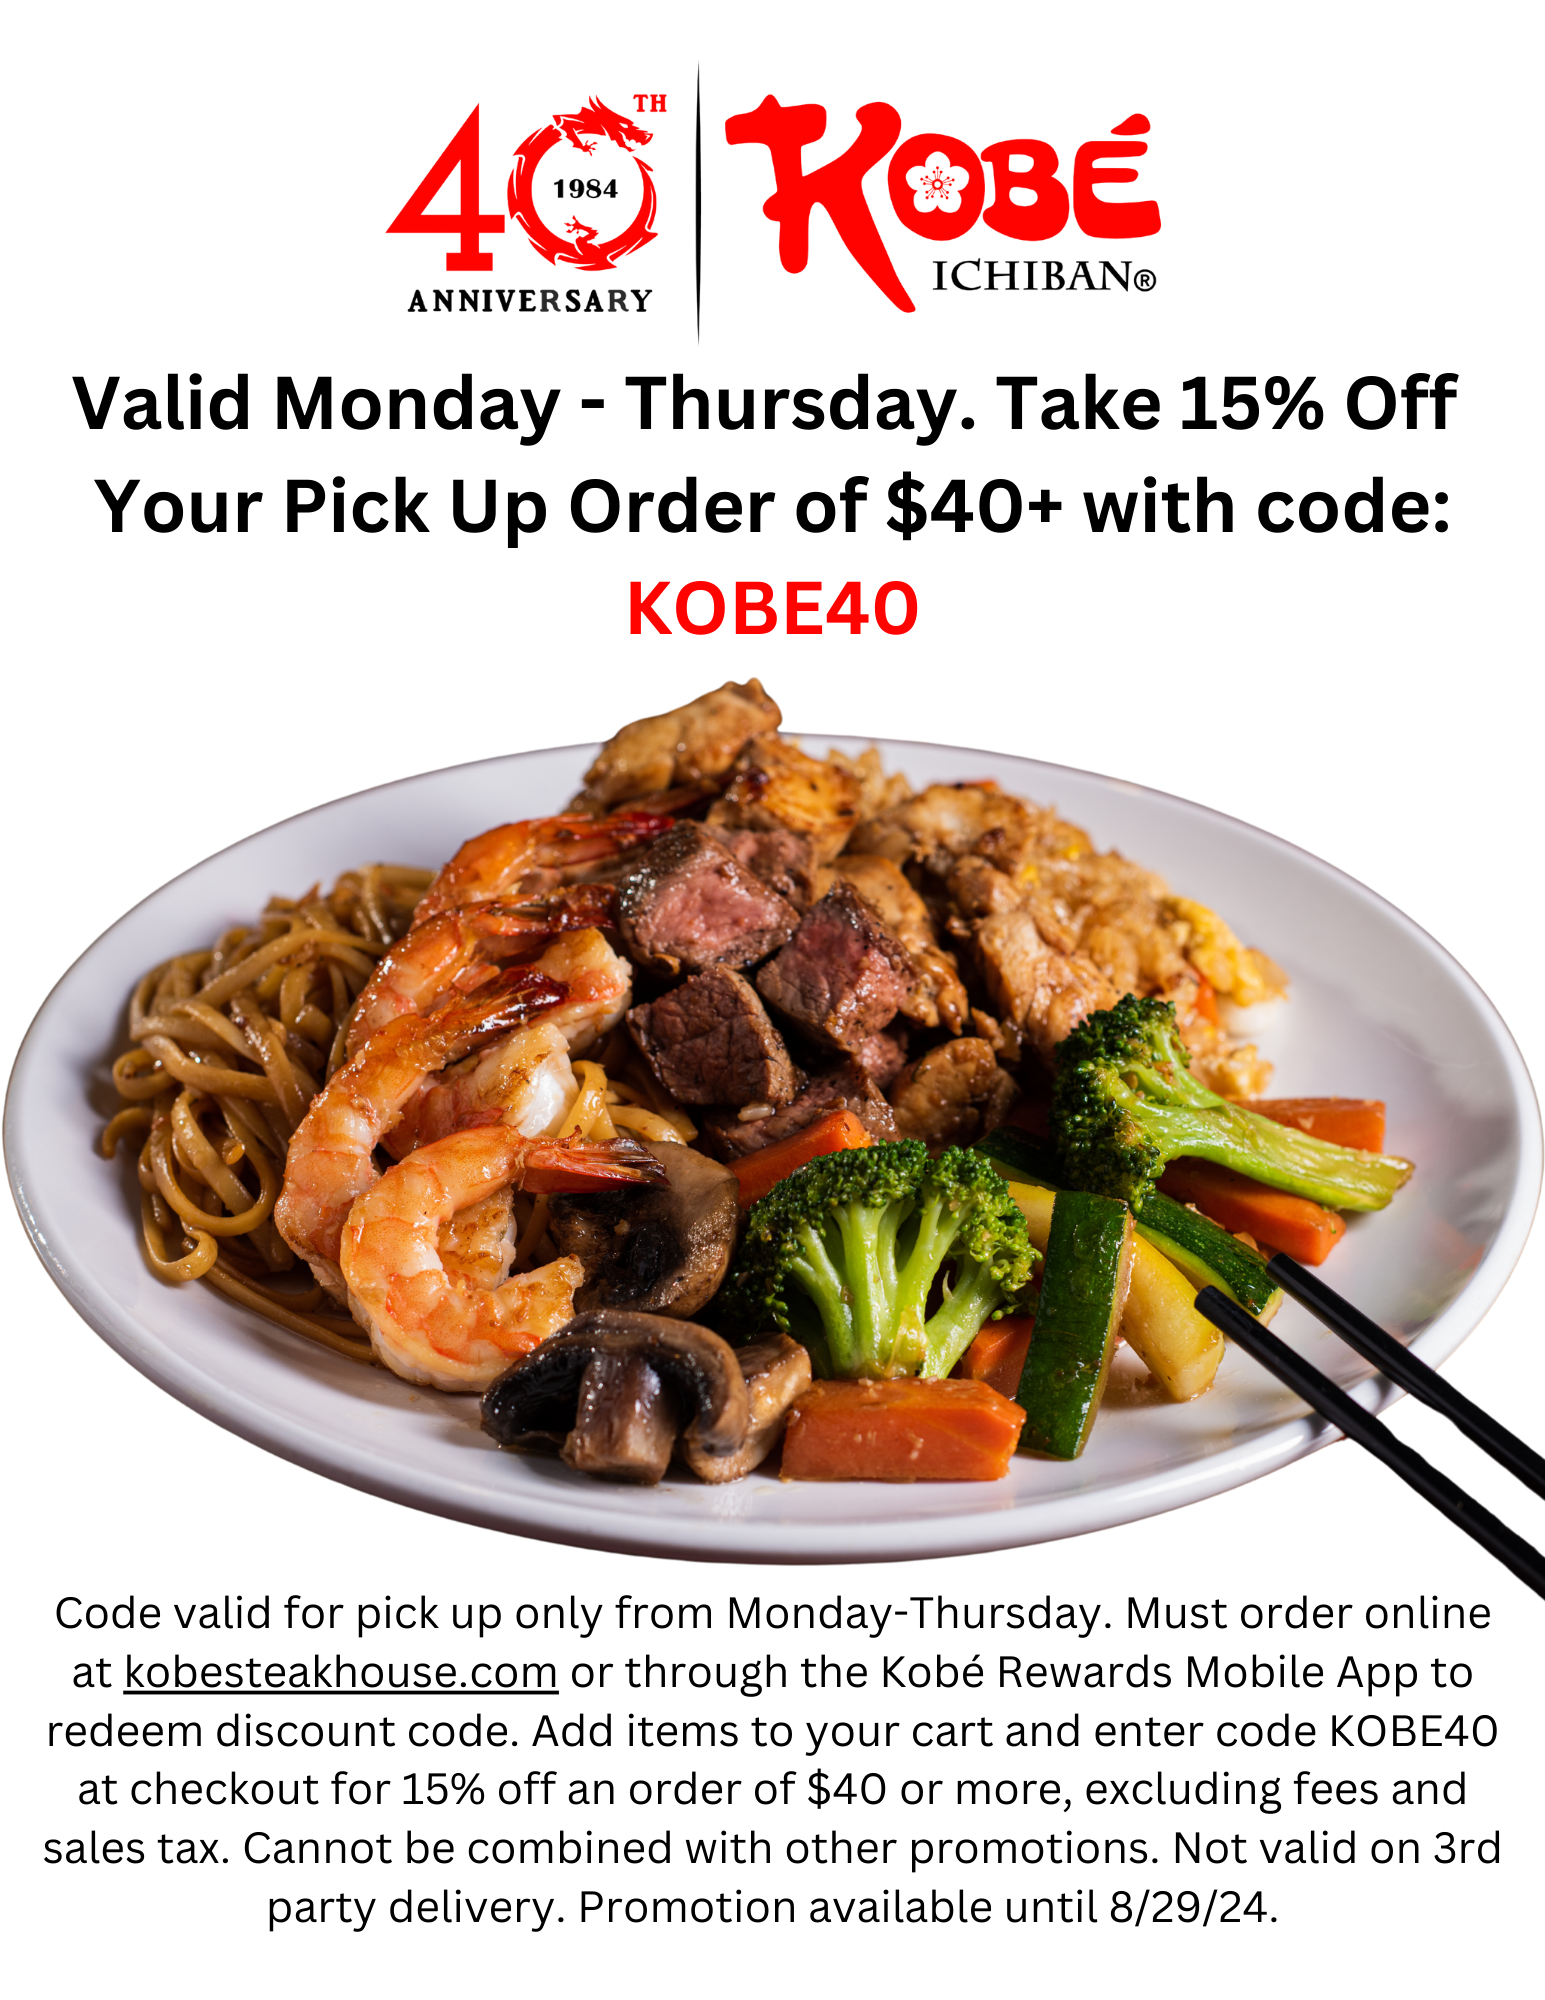 Valid Monday - Thursday. Take 15% Off Your Pick Up Order of $40+ with code: KOBE40 Code valid for pick up only from Monday-Thursday. Must order online at kobesteakhouse.com or through the Kobé Rewards Mobile App to redeem discount code. Add items to your cart and enter code KOBE40 at checkout for 15% off an order of $40 or more, excluding fees and sales tax. Cannot be combined with other promotions. Not valid on 3rd party delivery. Promotion available until 8/29/24.